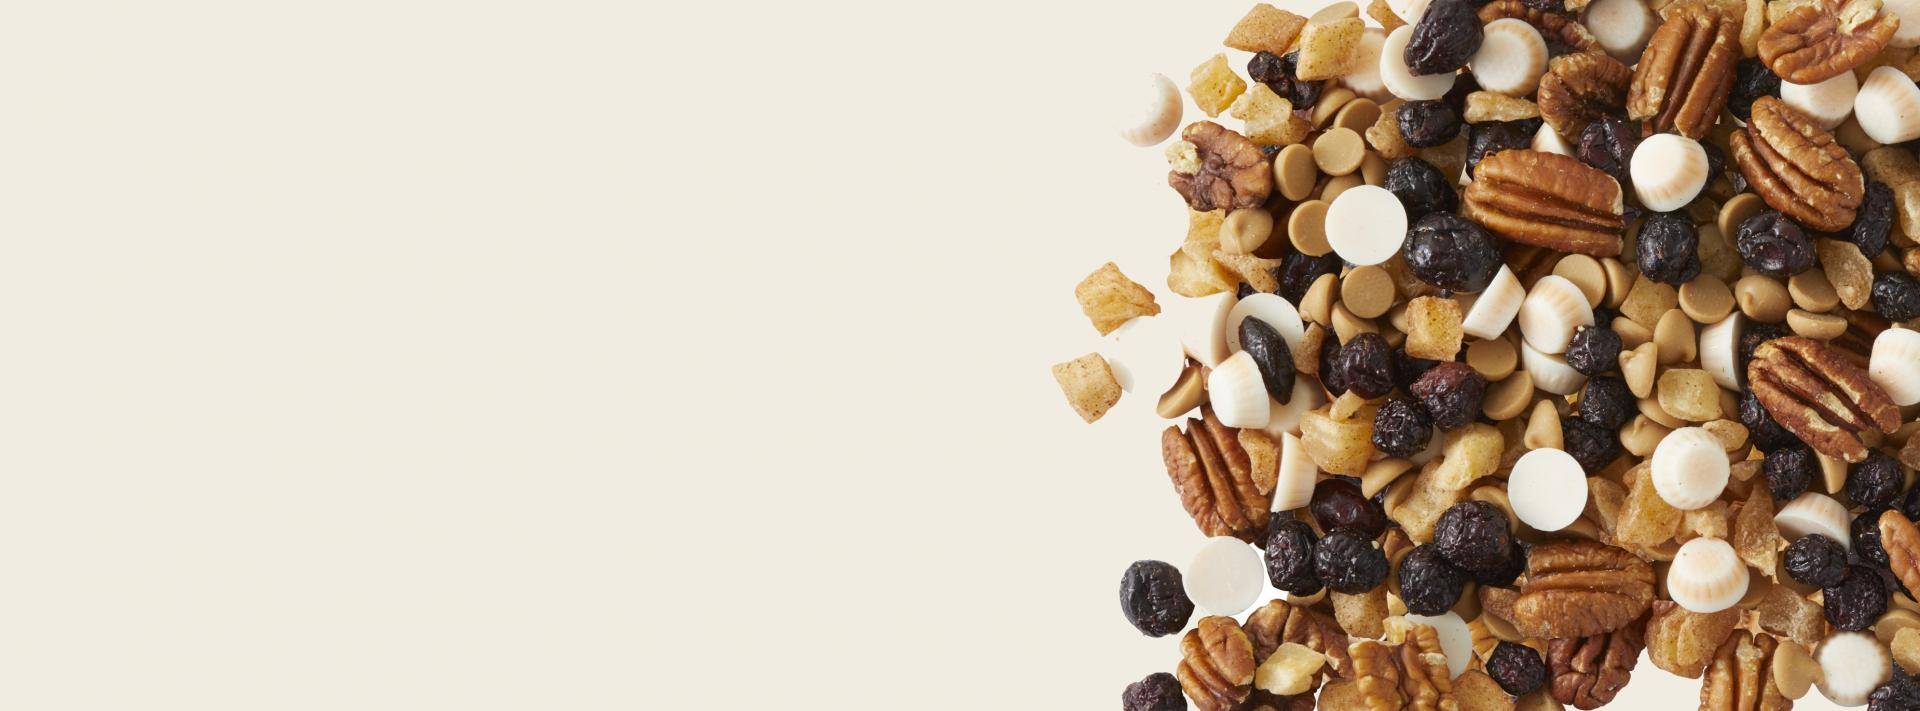 close-up of trail mix